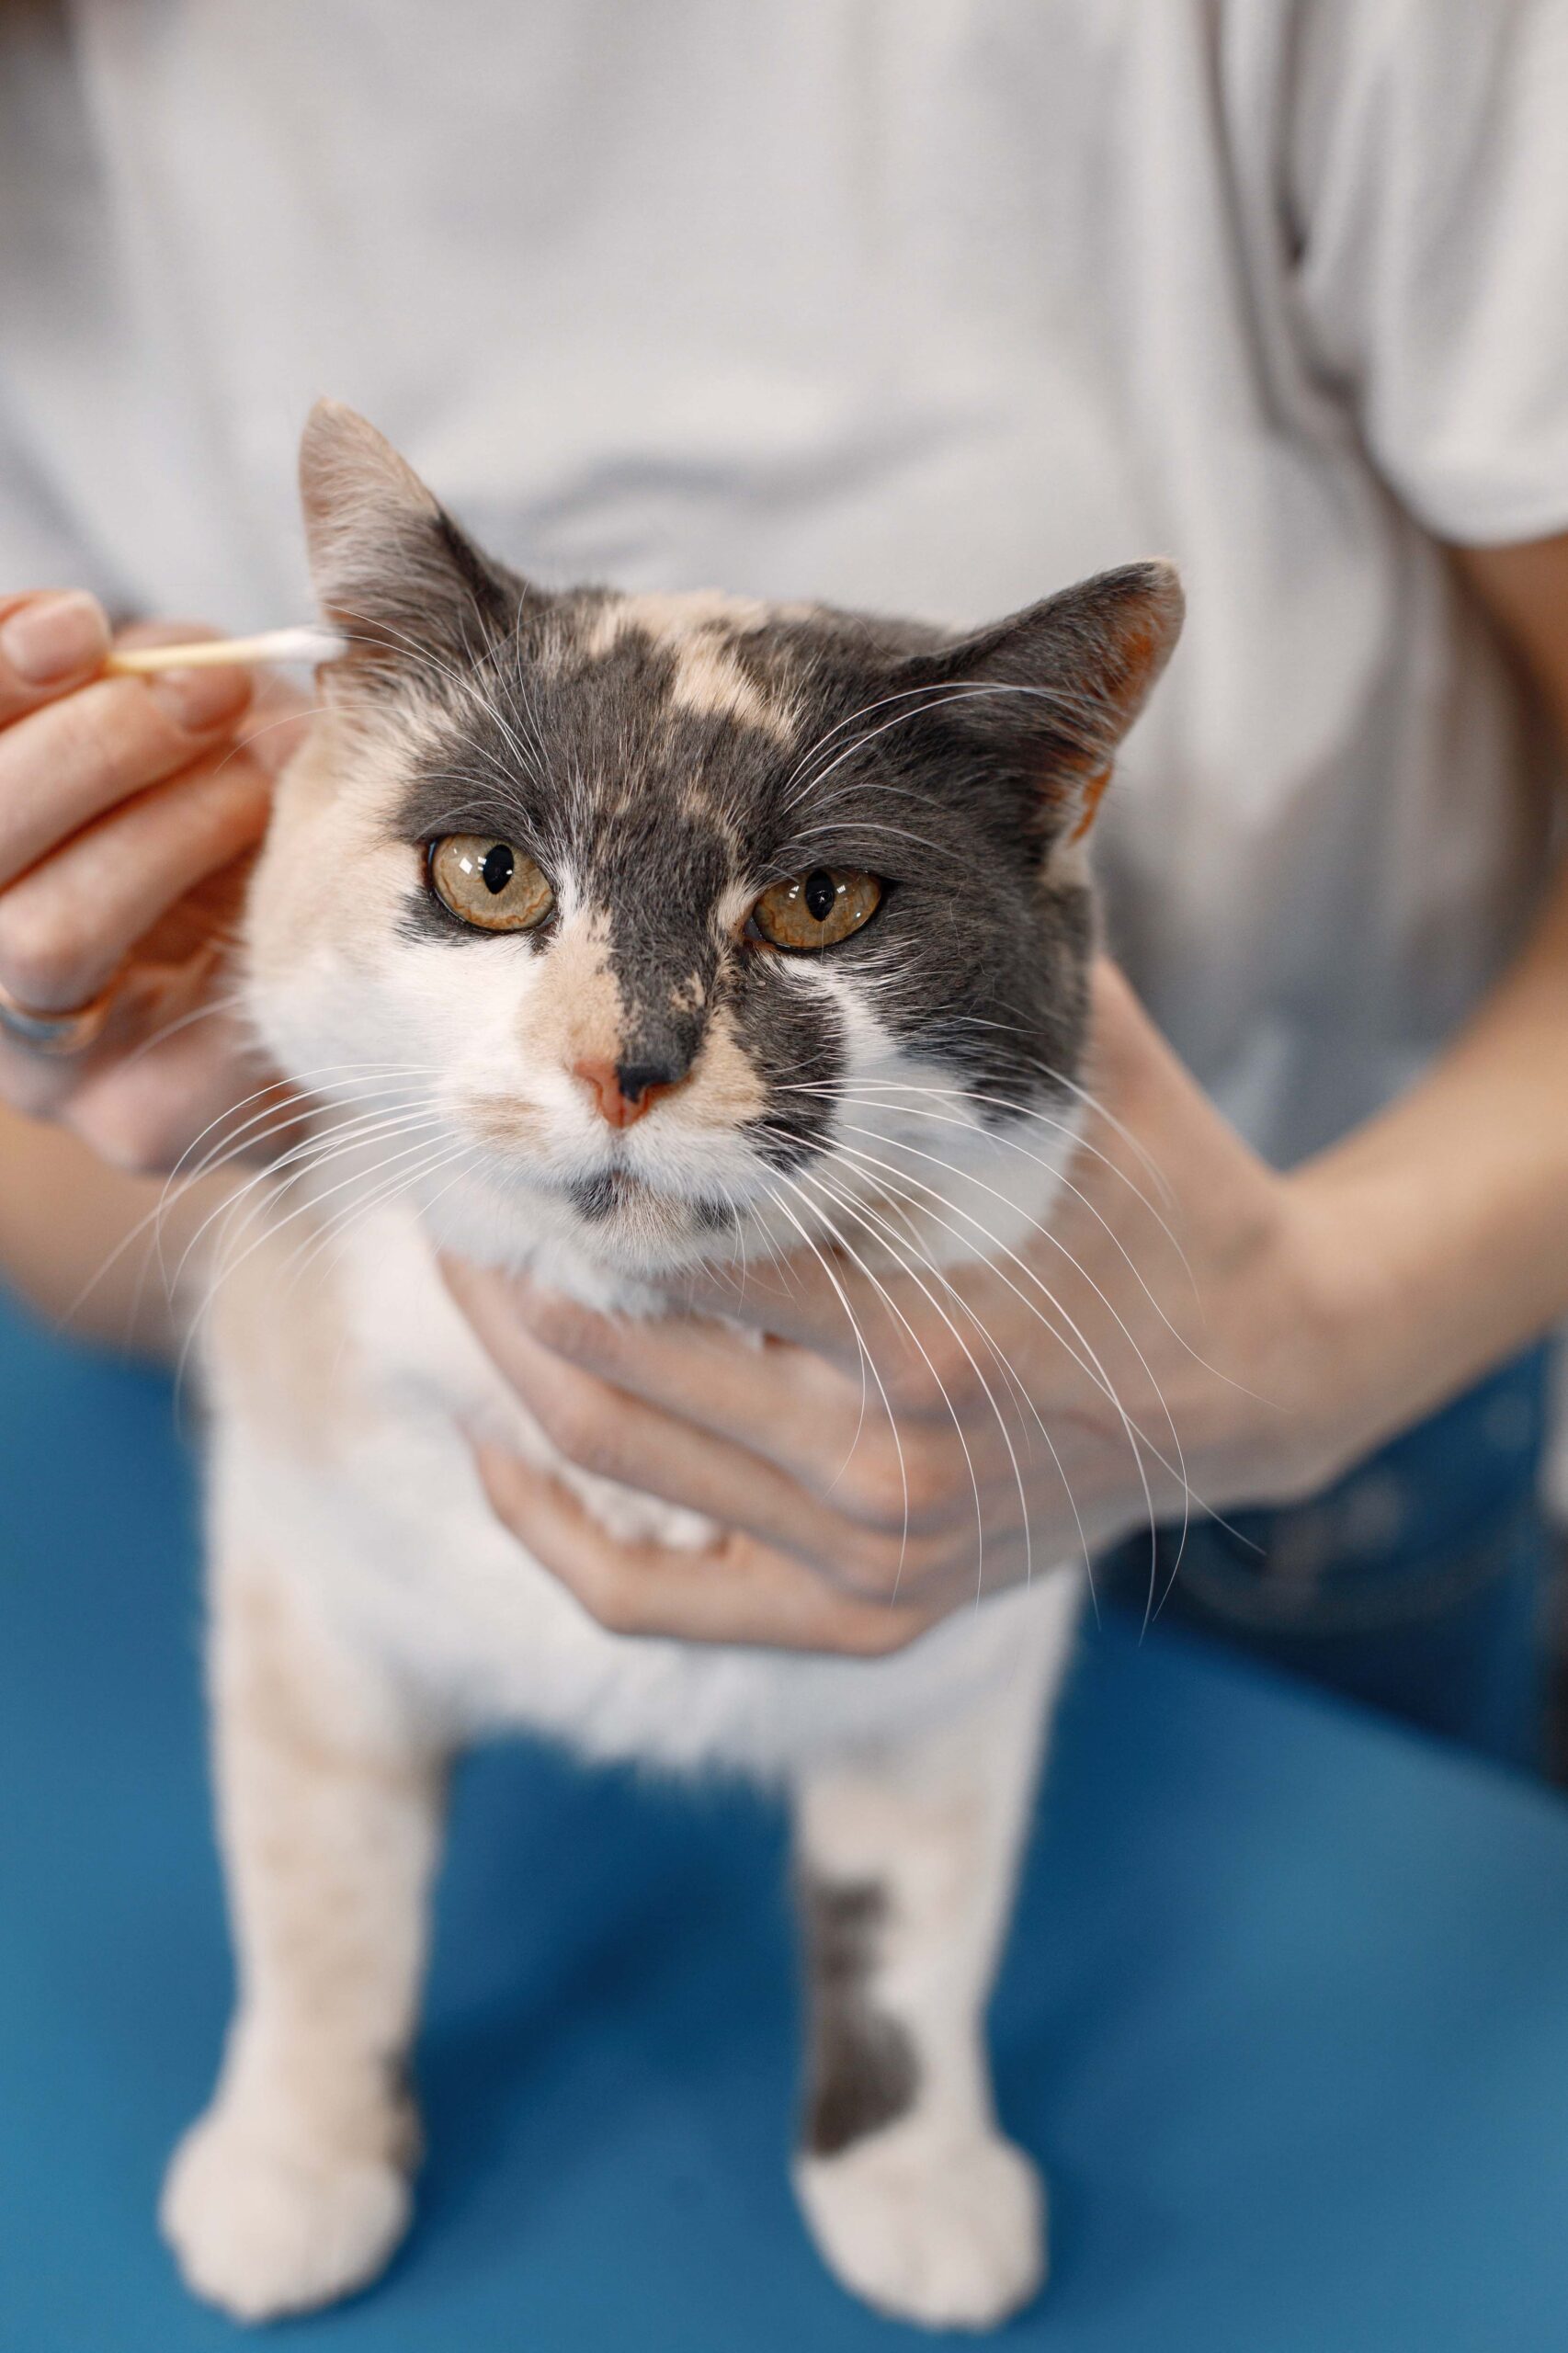 a person brushing a cat's ear